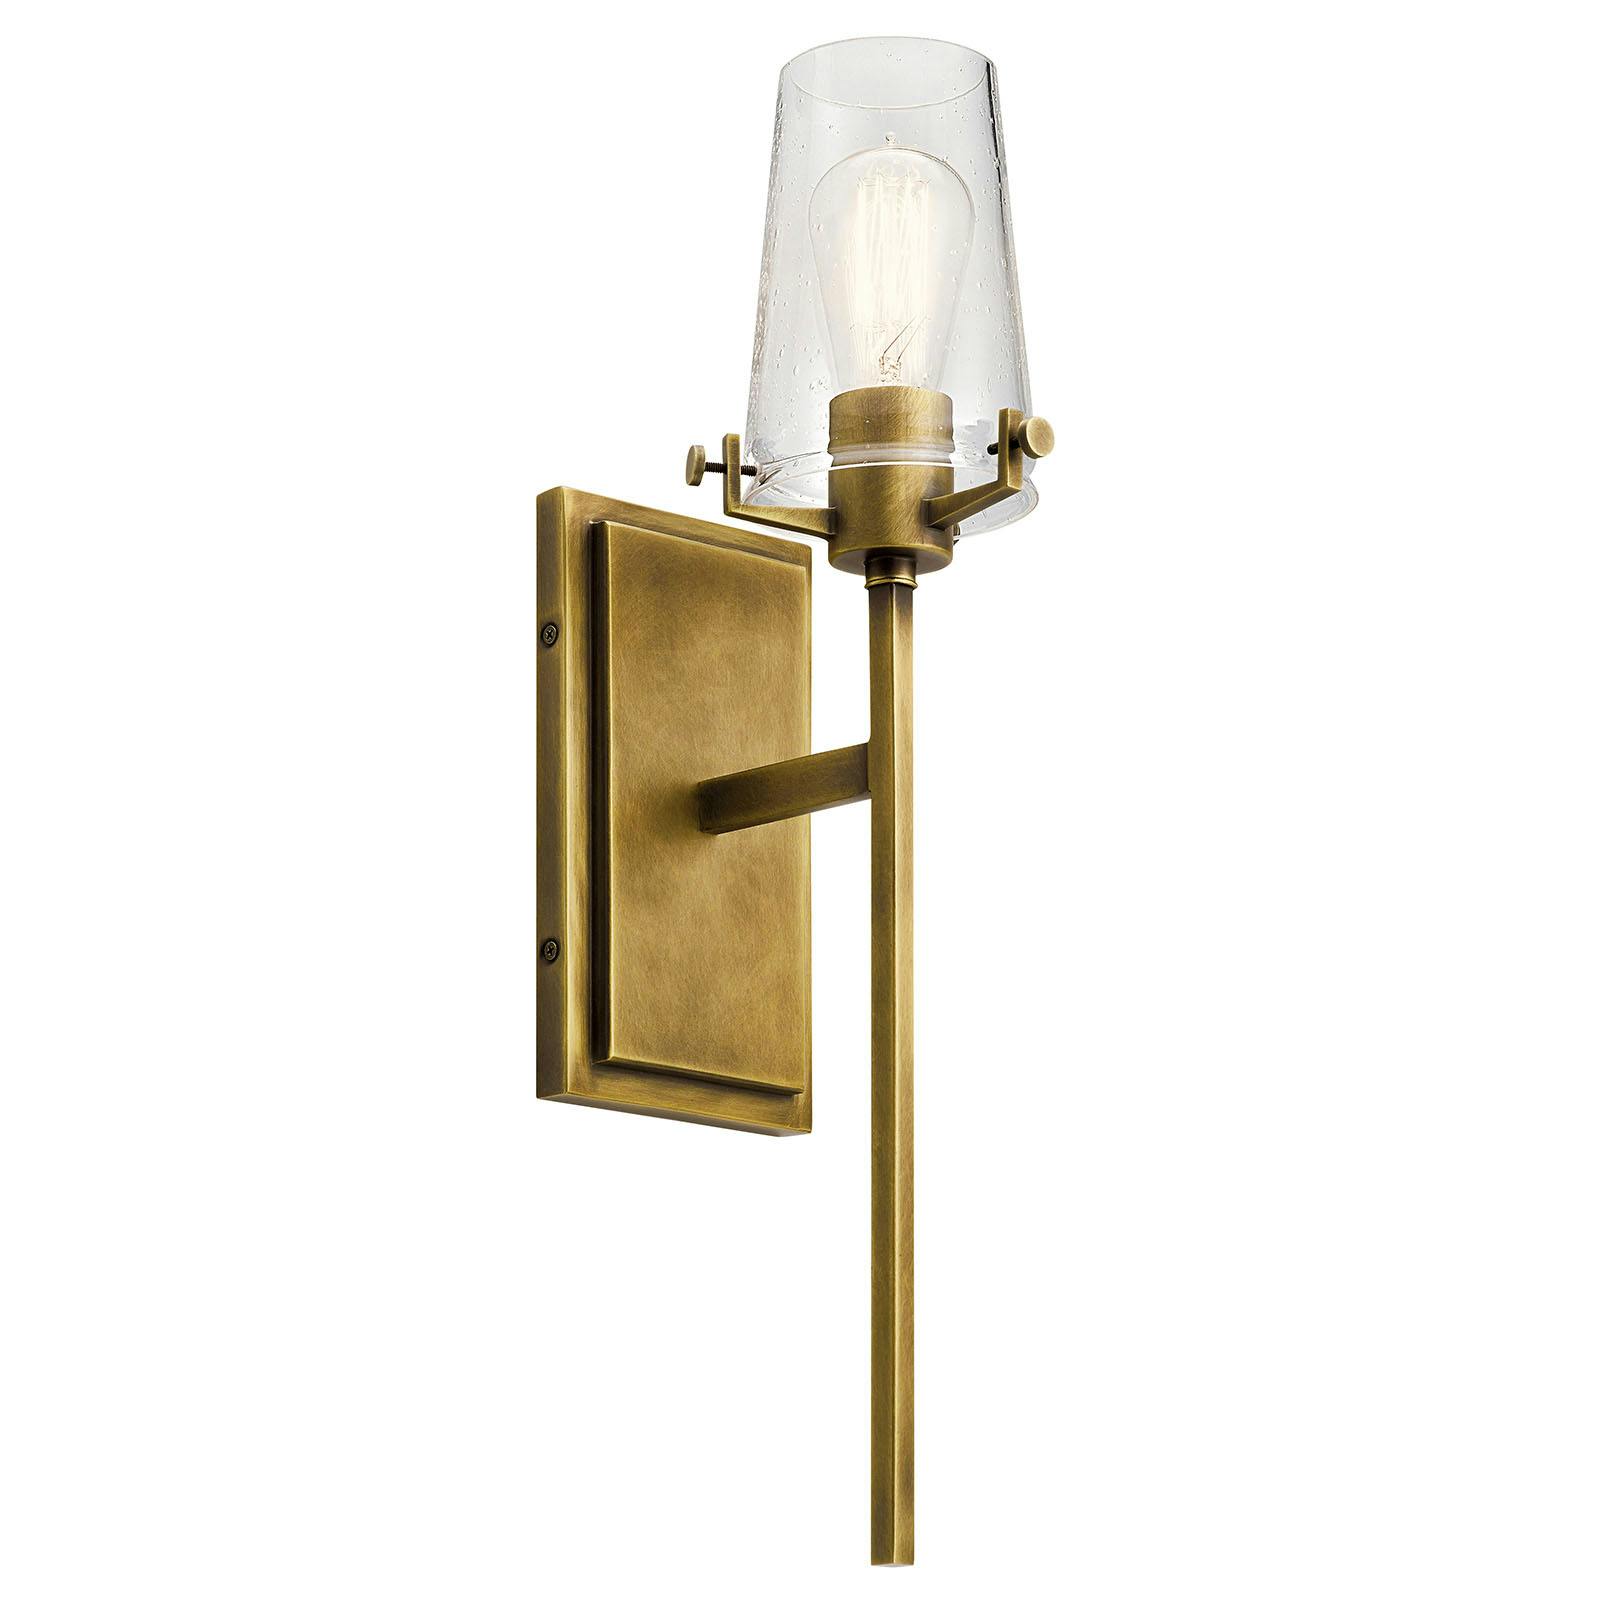 Alton 22" Sconce Seeded Glass & Brass on a white background